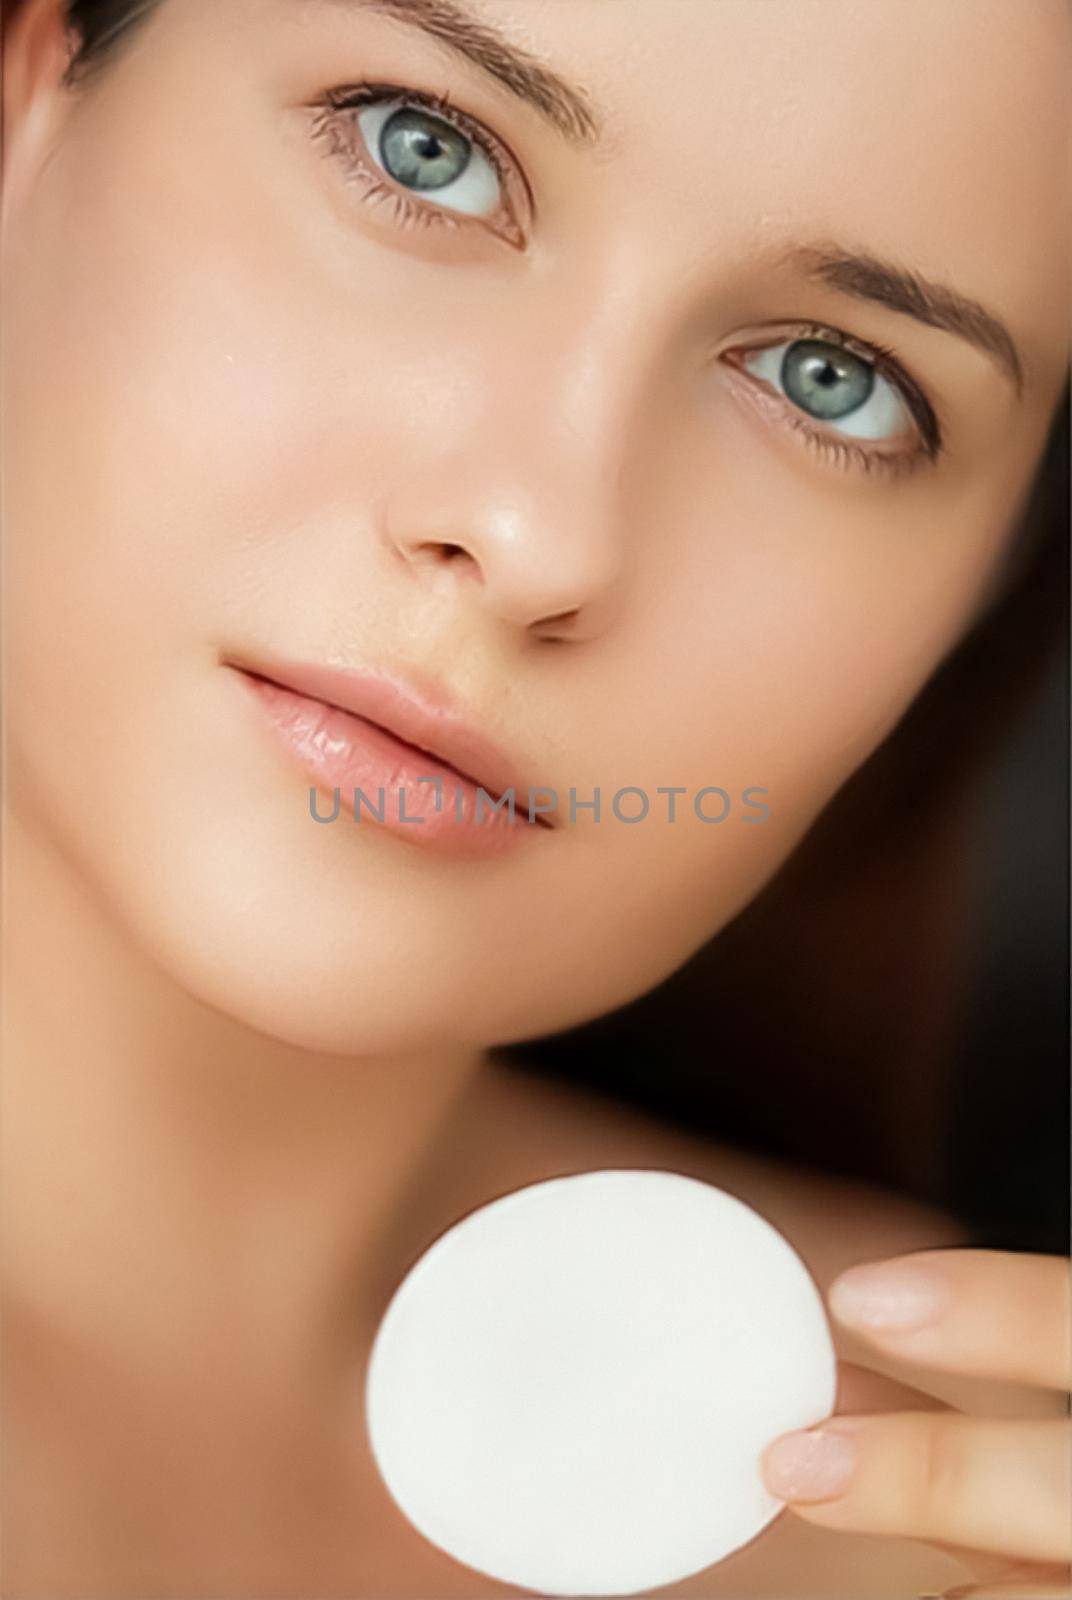 Beauty and skincare cosmetics model face portrait, woman with clean healthy skin and no make-up look using cotton pad, luxury facial and anti-aging skin care routine by Anneleven